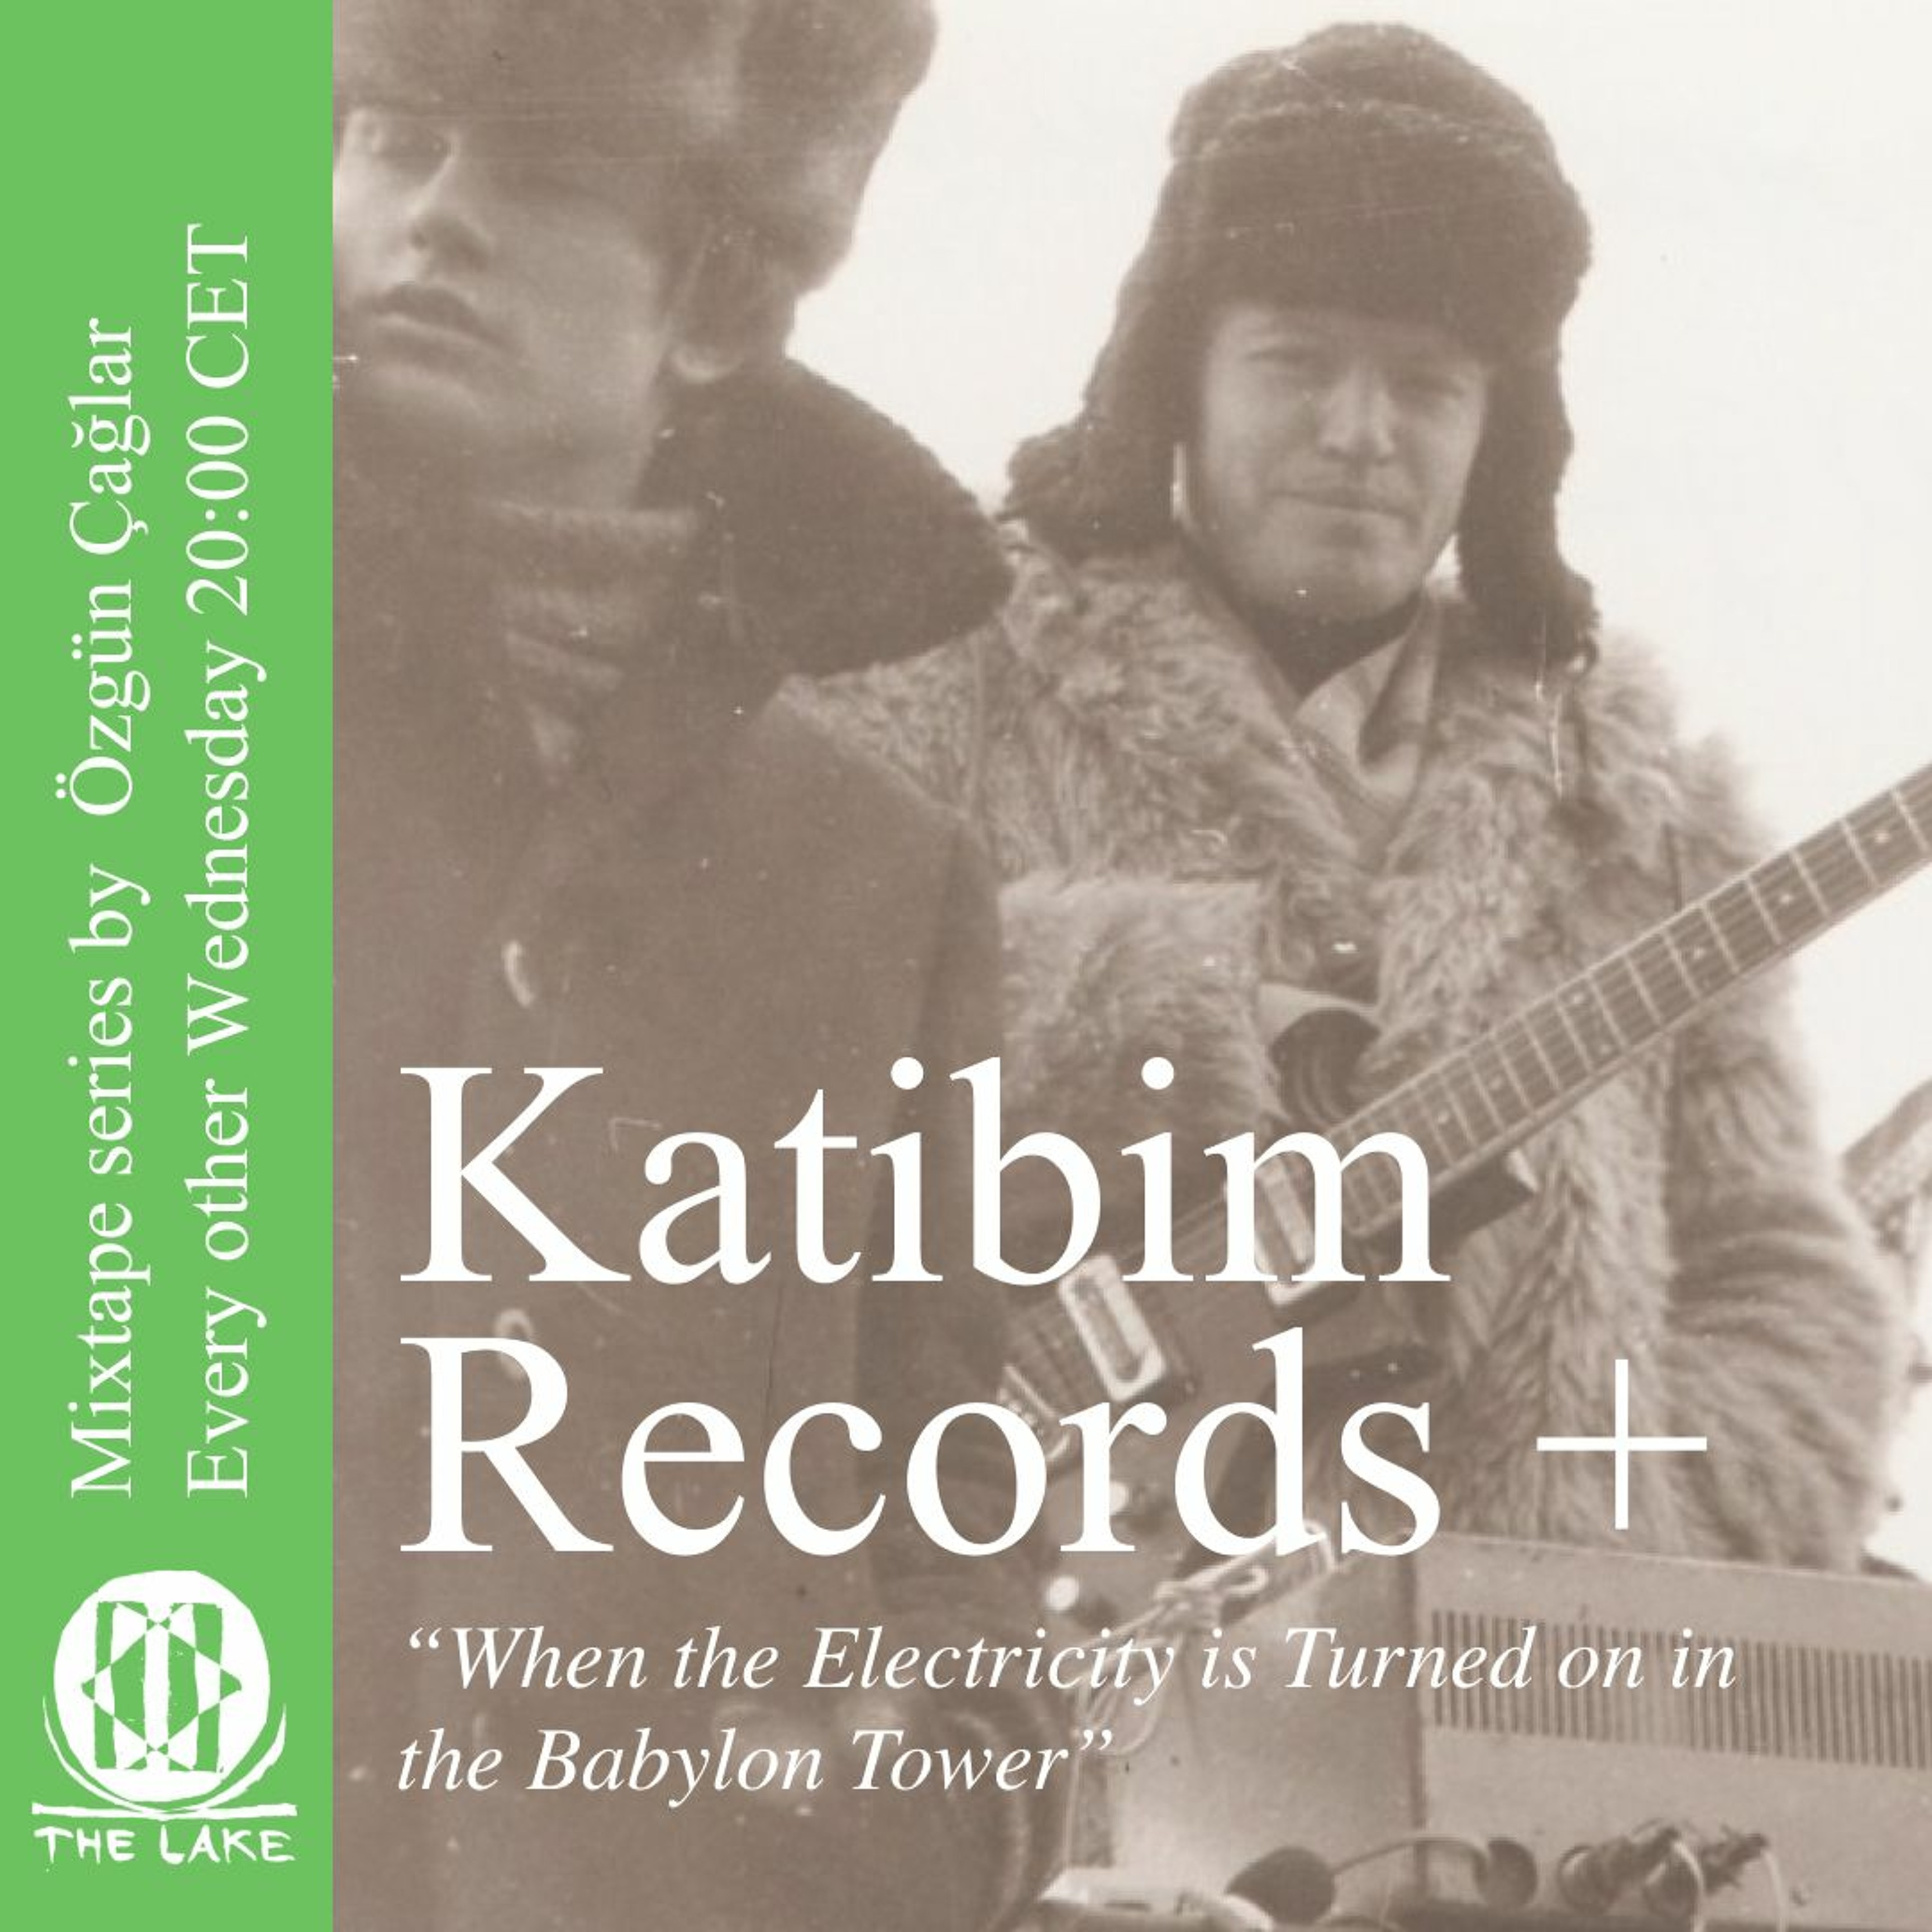 Katibim Records + 01 ”When the Electricity is Turned on in the Babylon Tower”